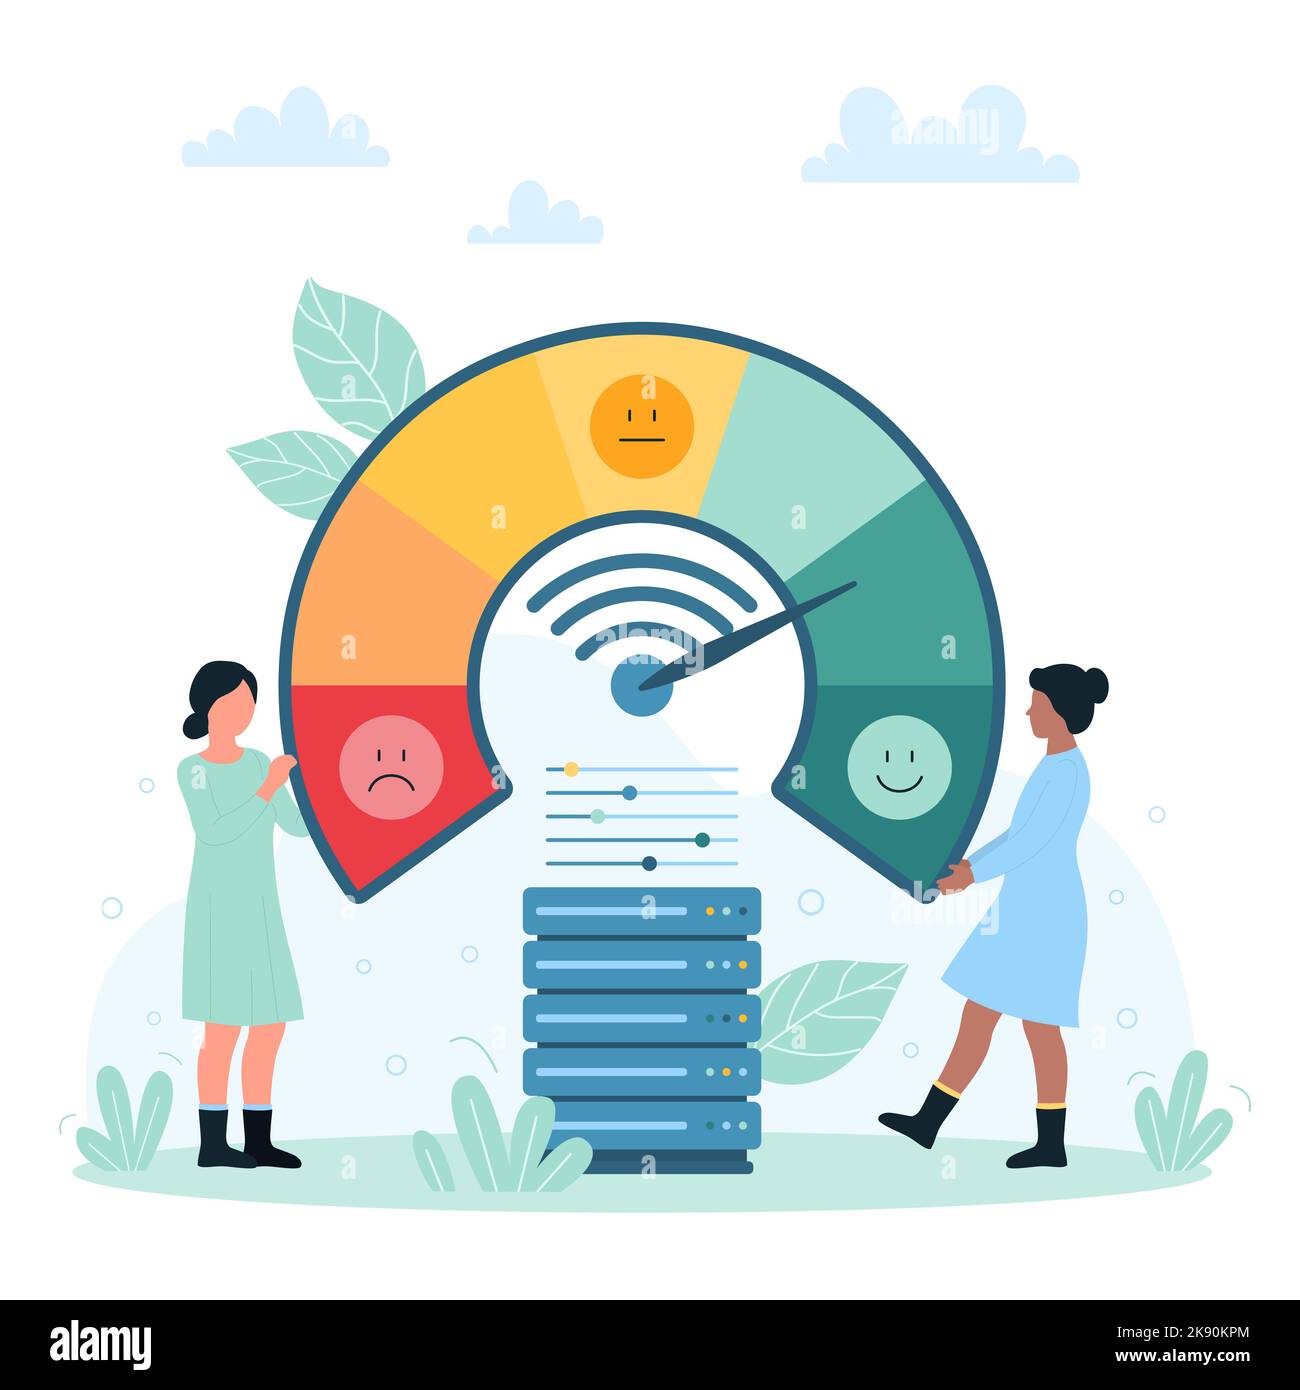 High speed broadband internet, network optimization vector illustration. Cartoon tiny people accelerate wifi signal on dashboard with speedometer and arrow, boost quick signal in provider speedtest Stock Vector